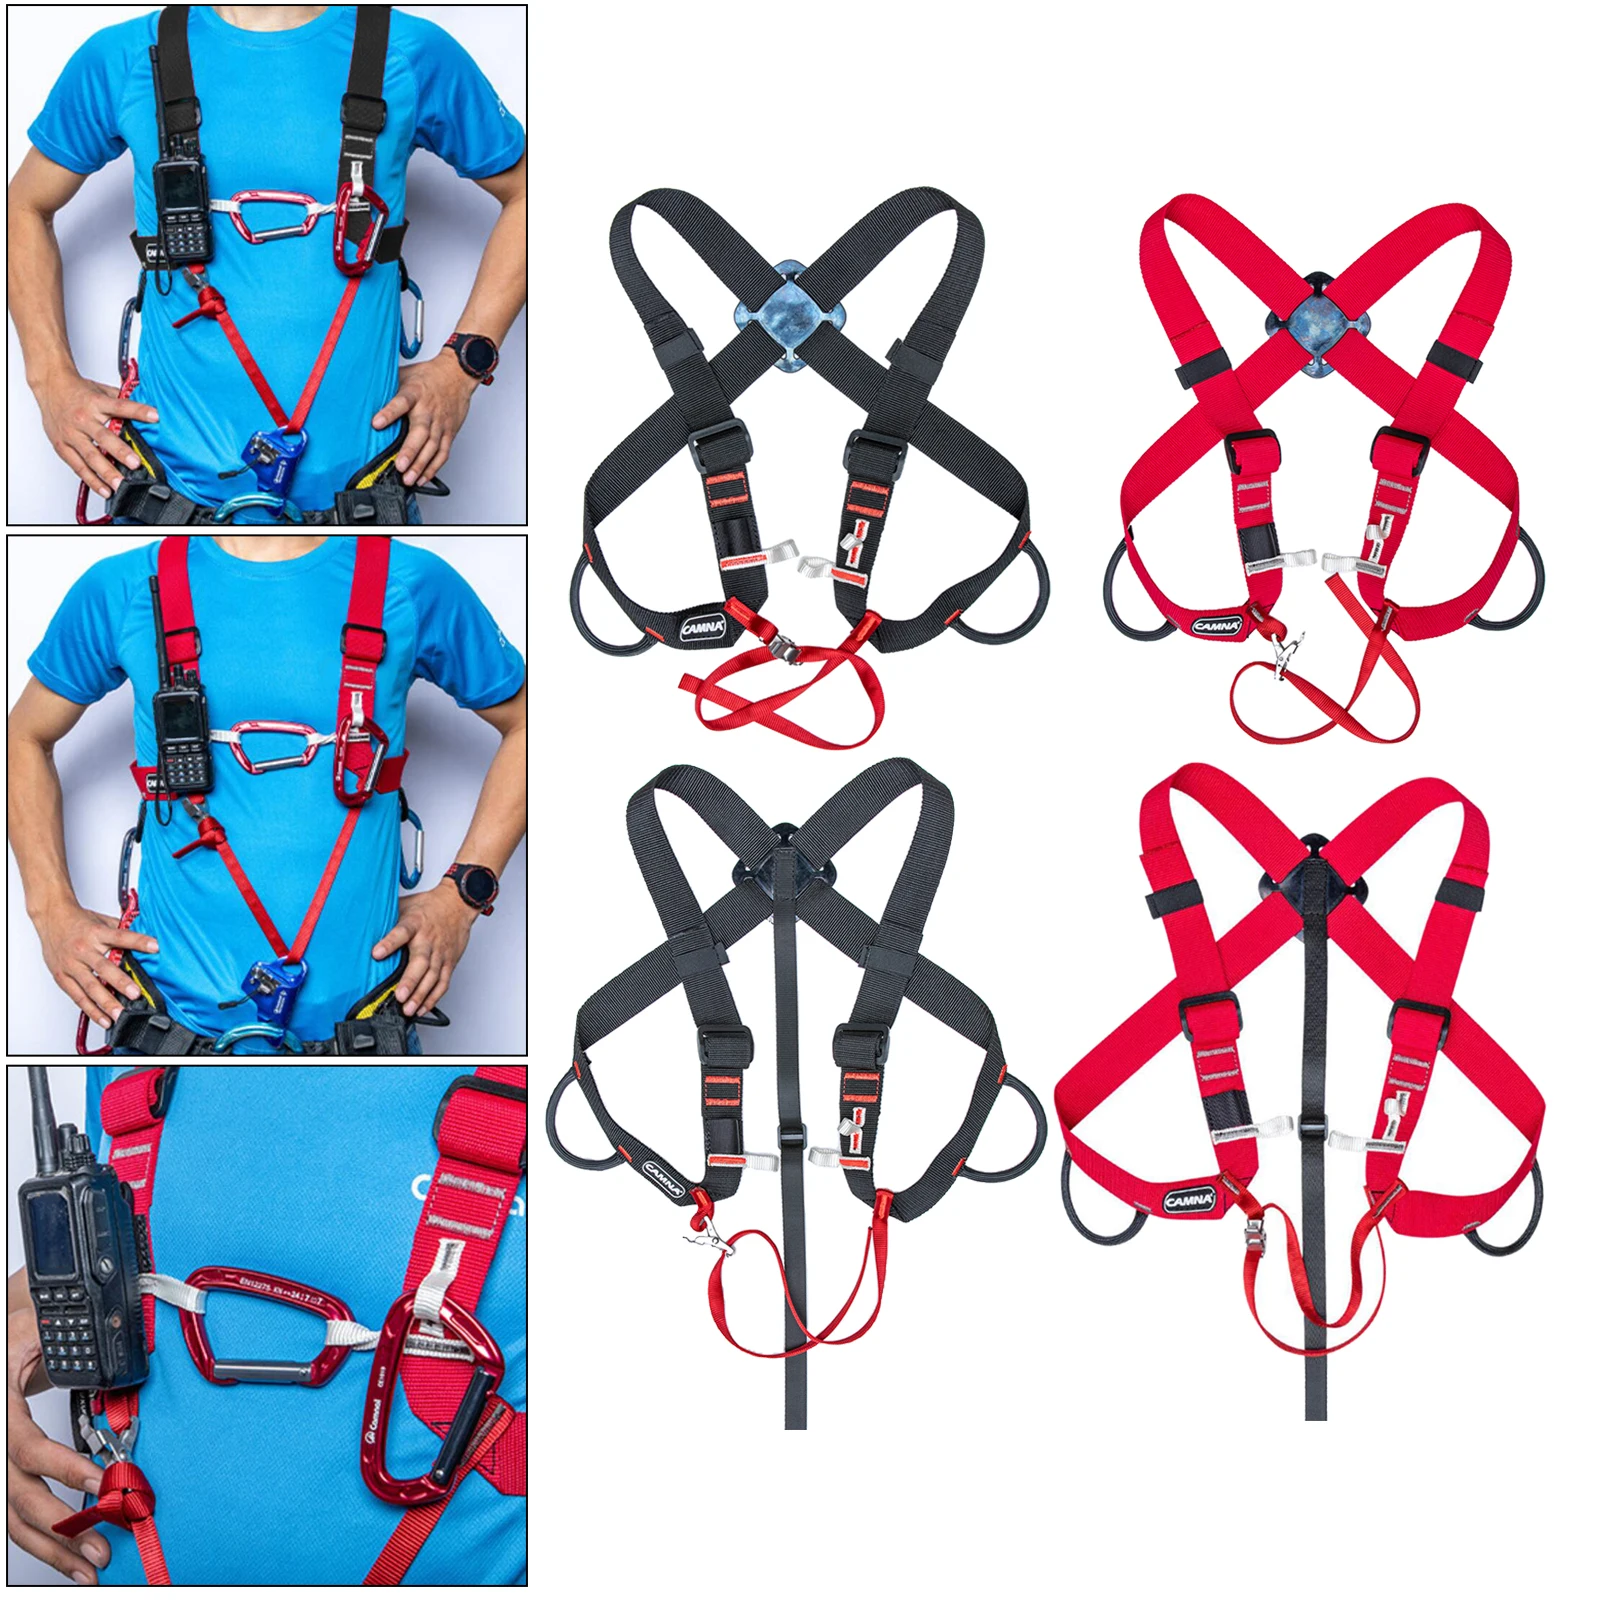 Upper Body Climbing Safety Harness Ascending Protection Fixed Belt Canyoning